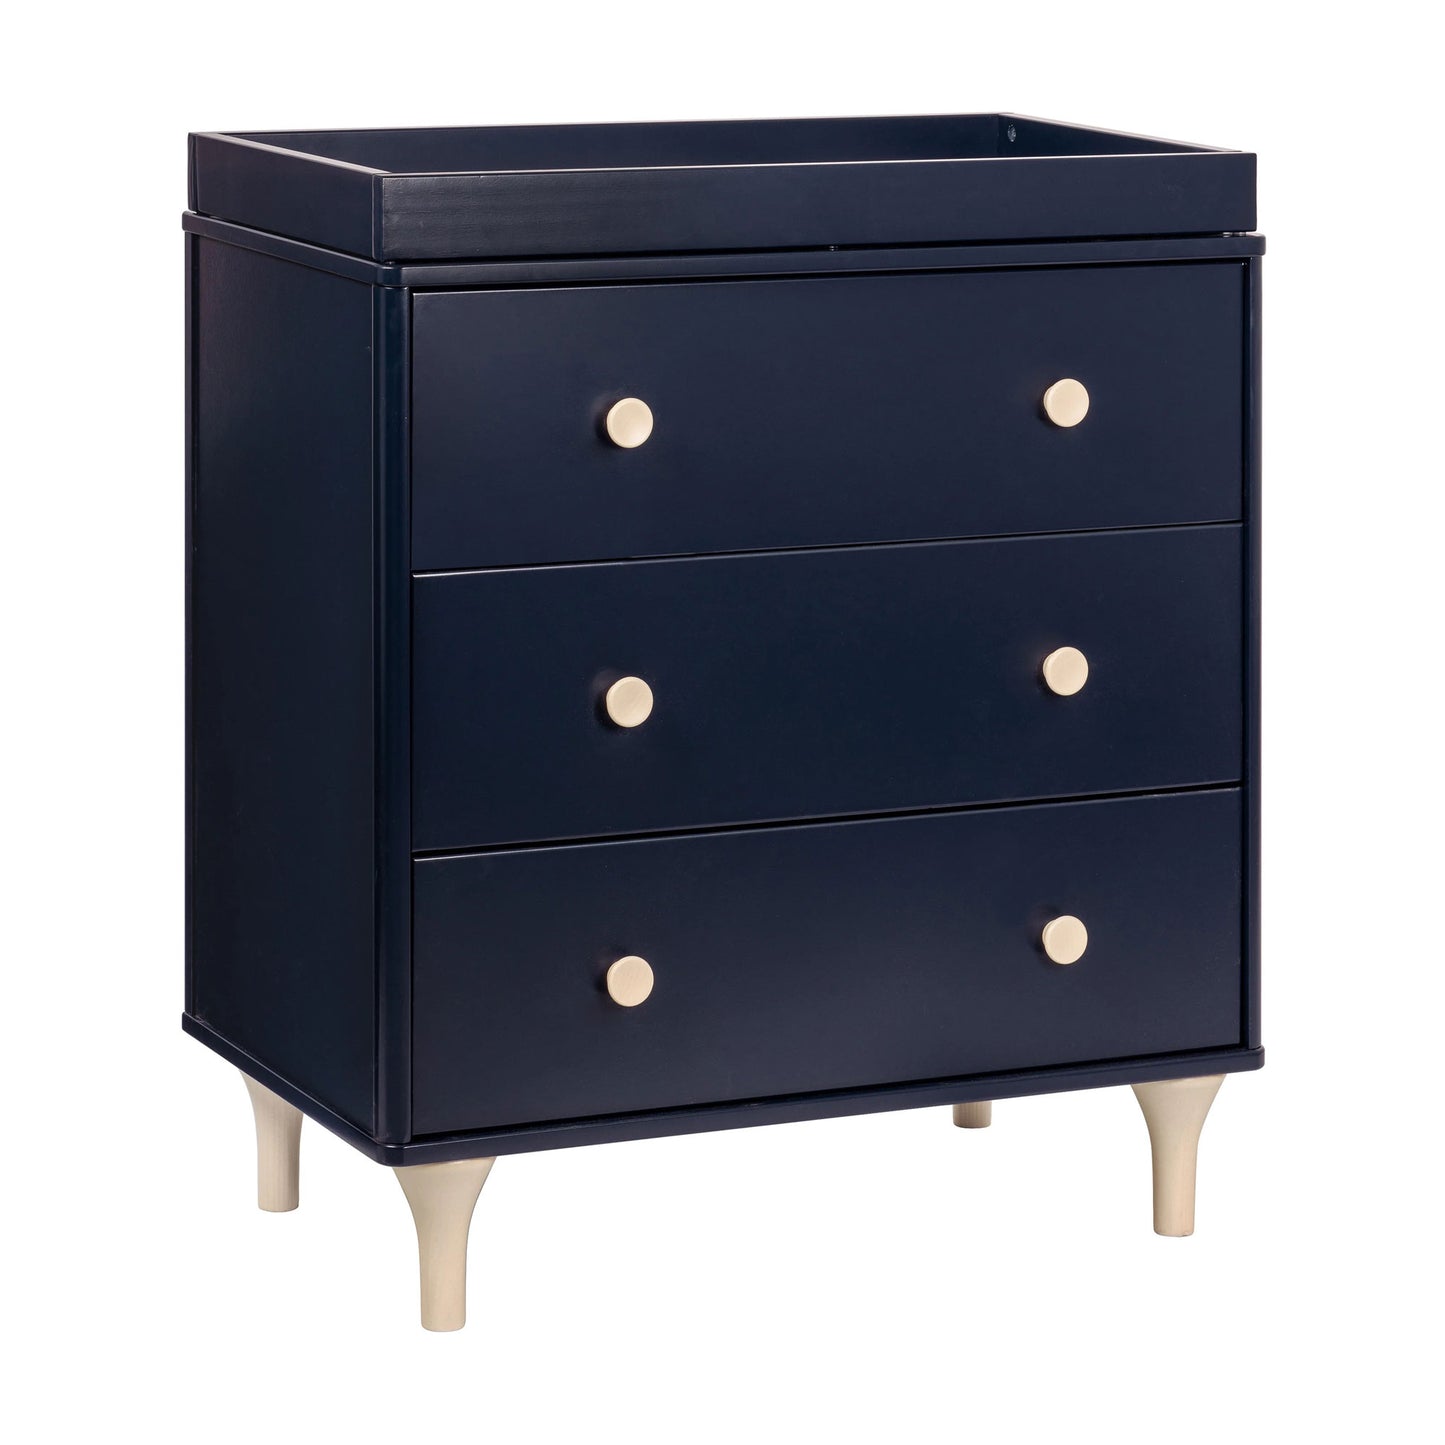 Babyletto Lolly 3-Drawer Changer Dresser with Removable Changing Tray - Navy/Washed Natural